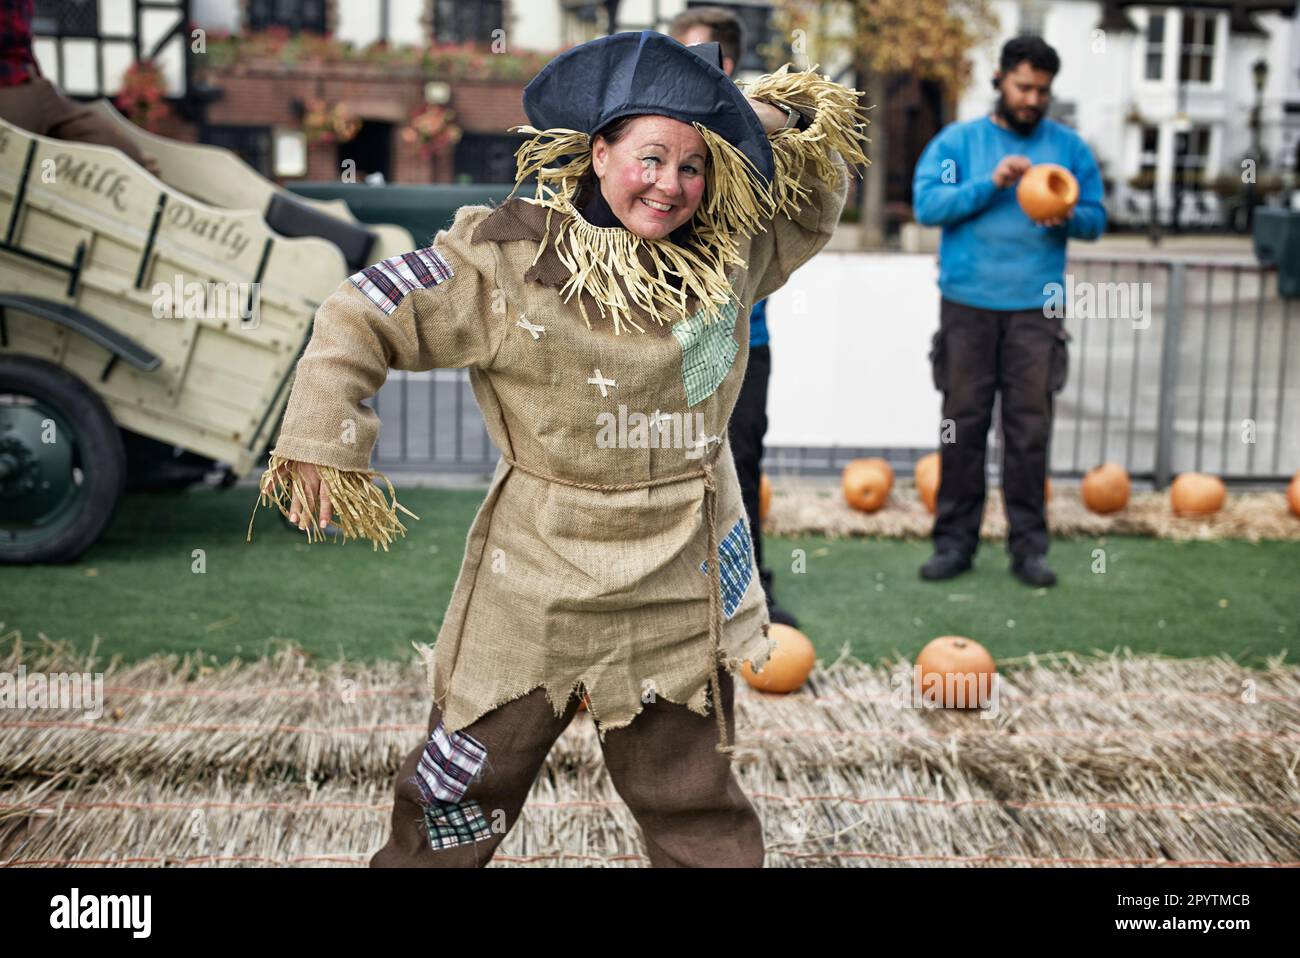 Woman dressed as a straw scarecrow selling pumpkins for the Halloween festivities. England UK Stock Photo